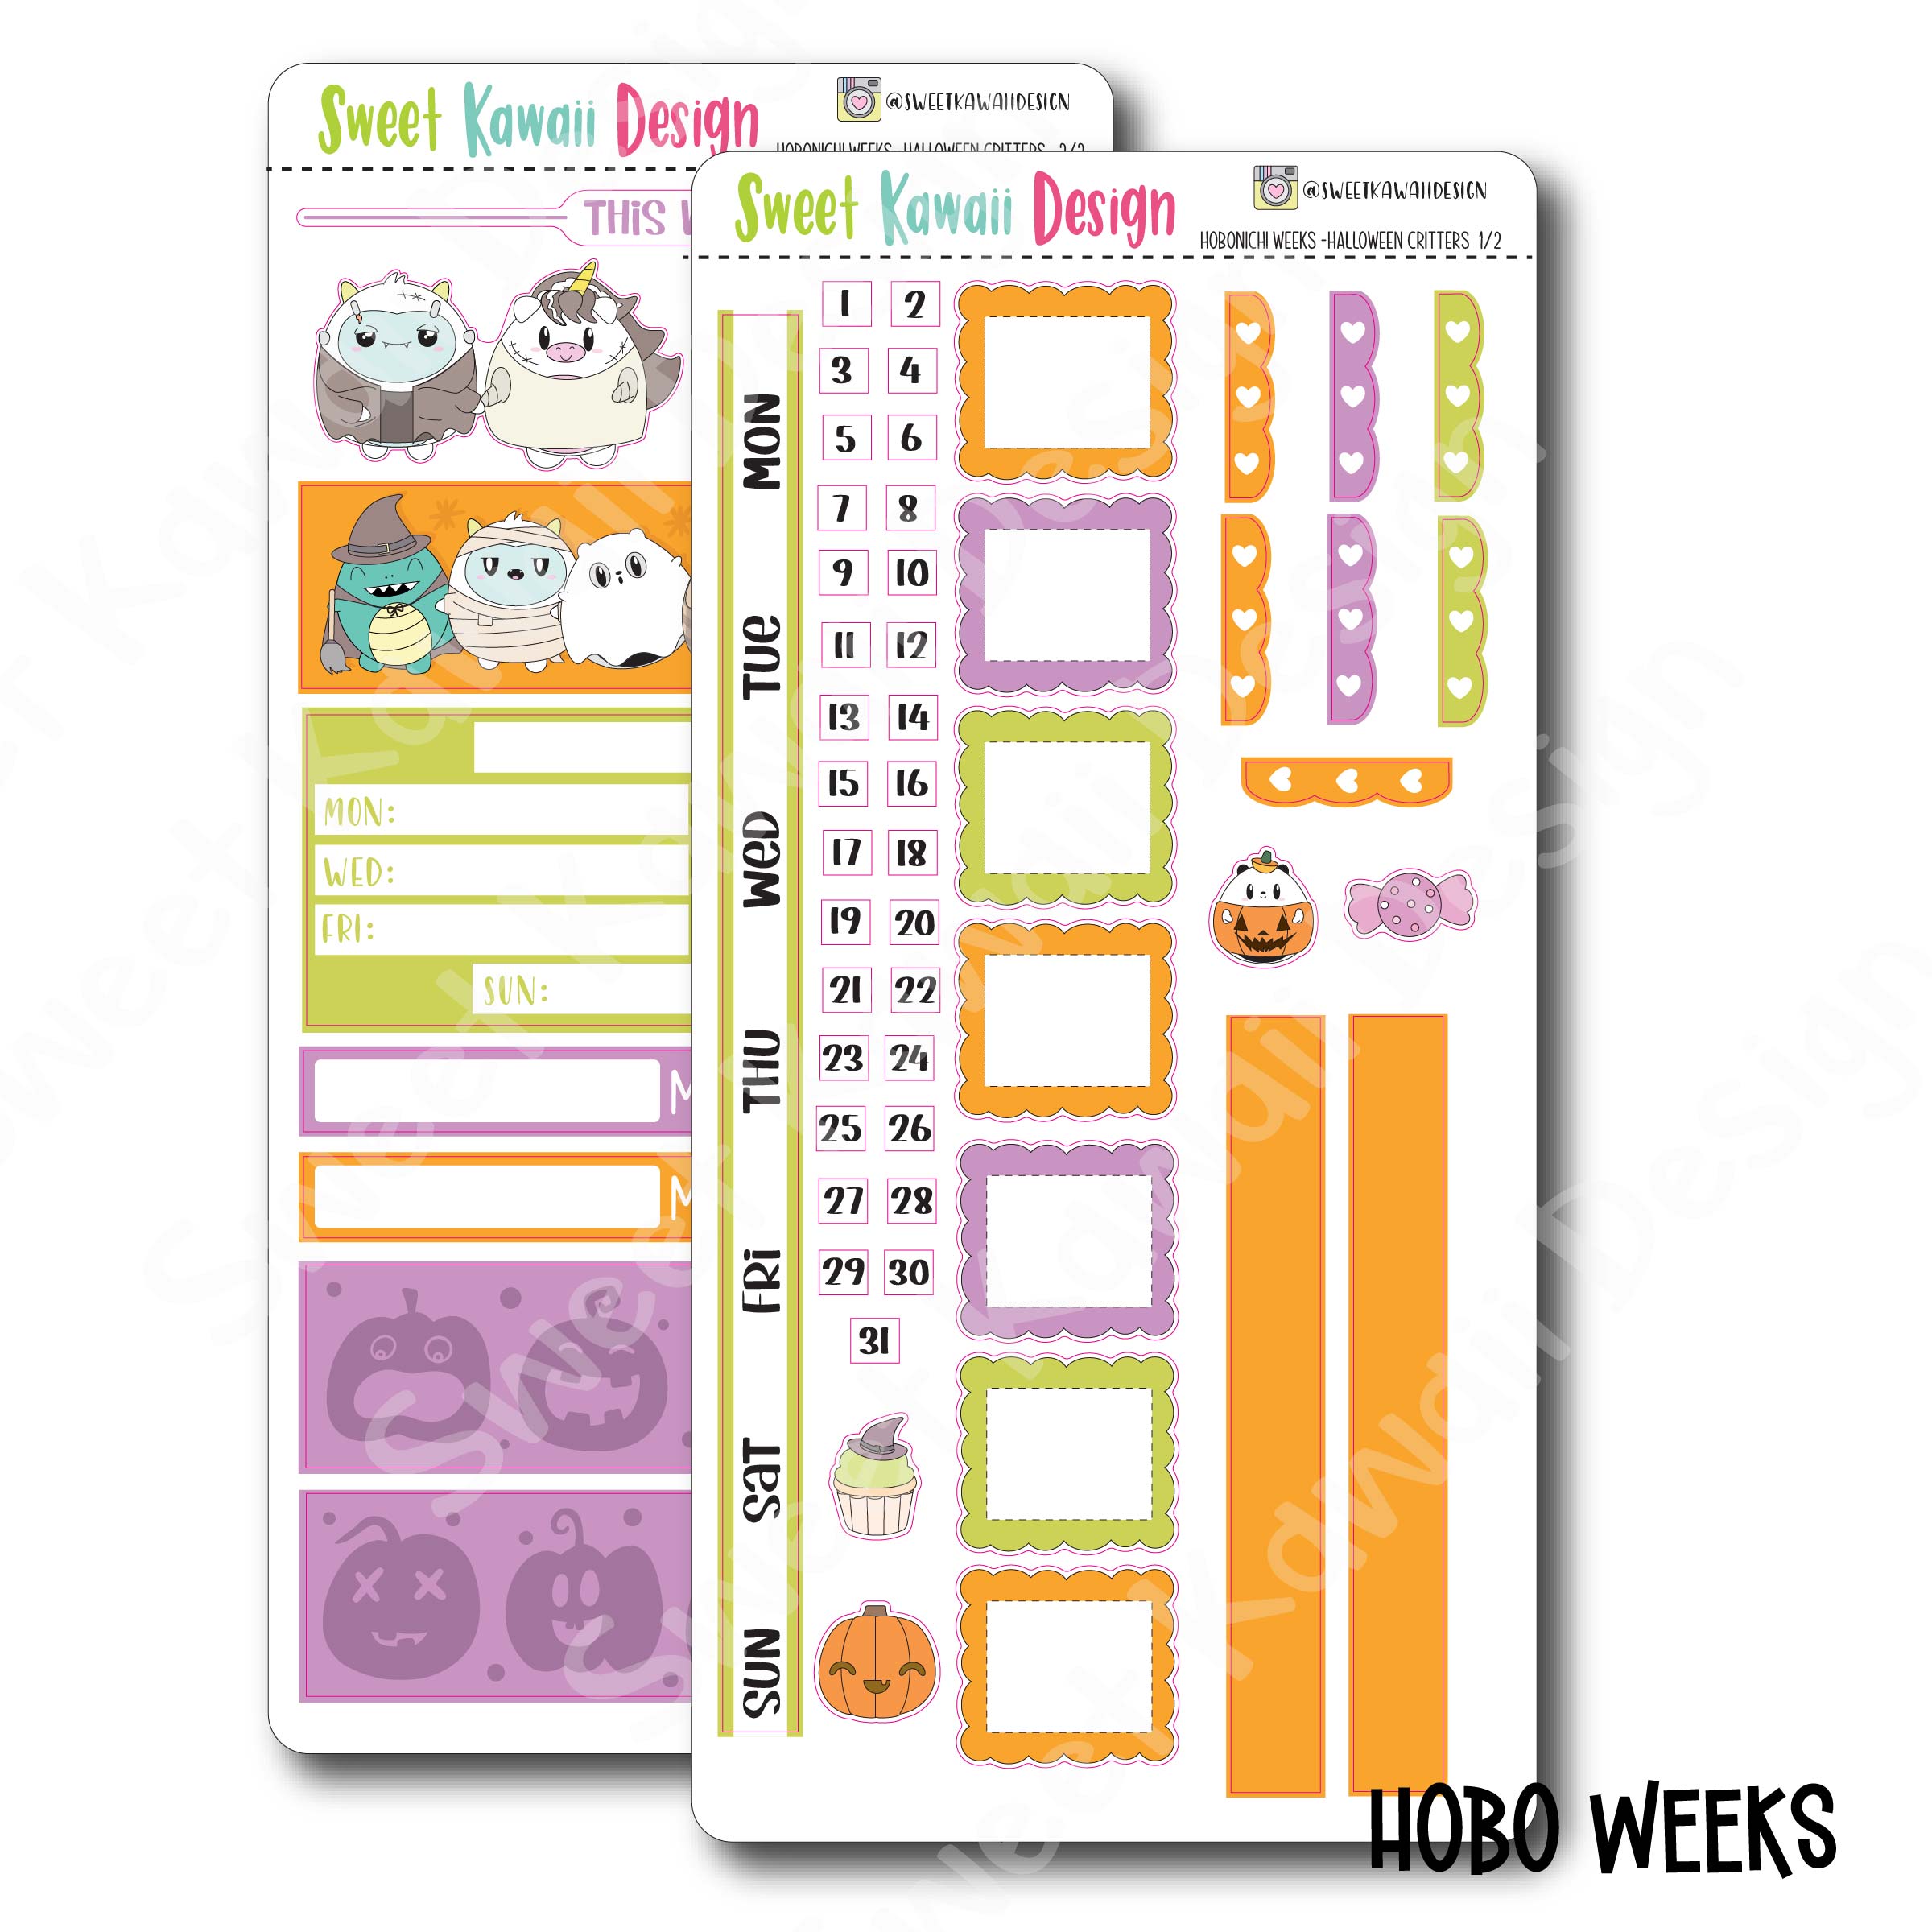 Weekly Kit  - Halloween Critters - SIZE OPTIONS AVAILABLE